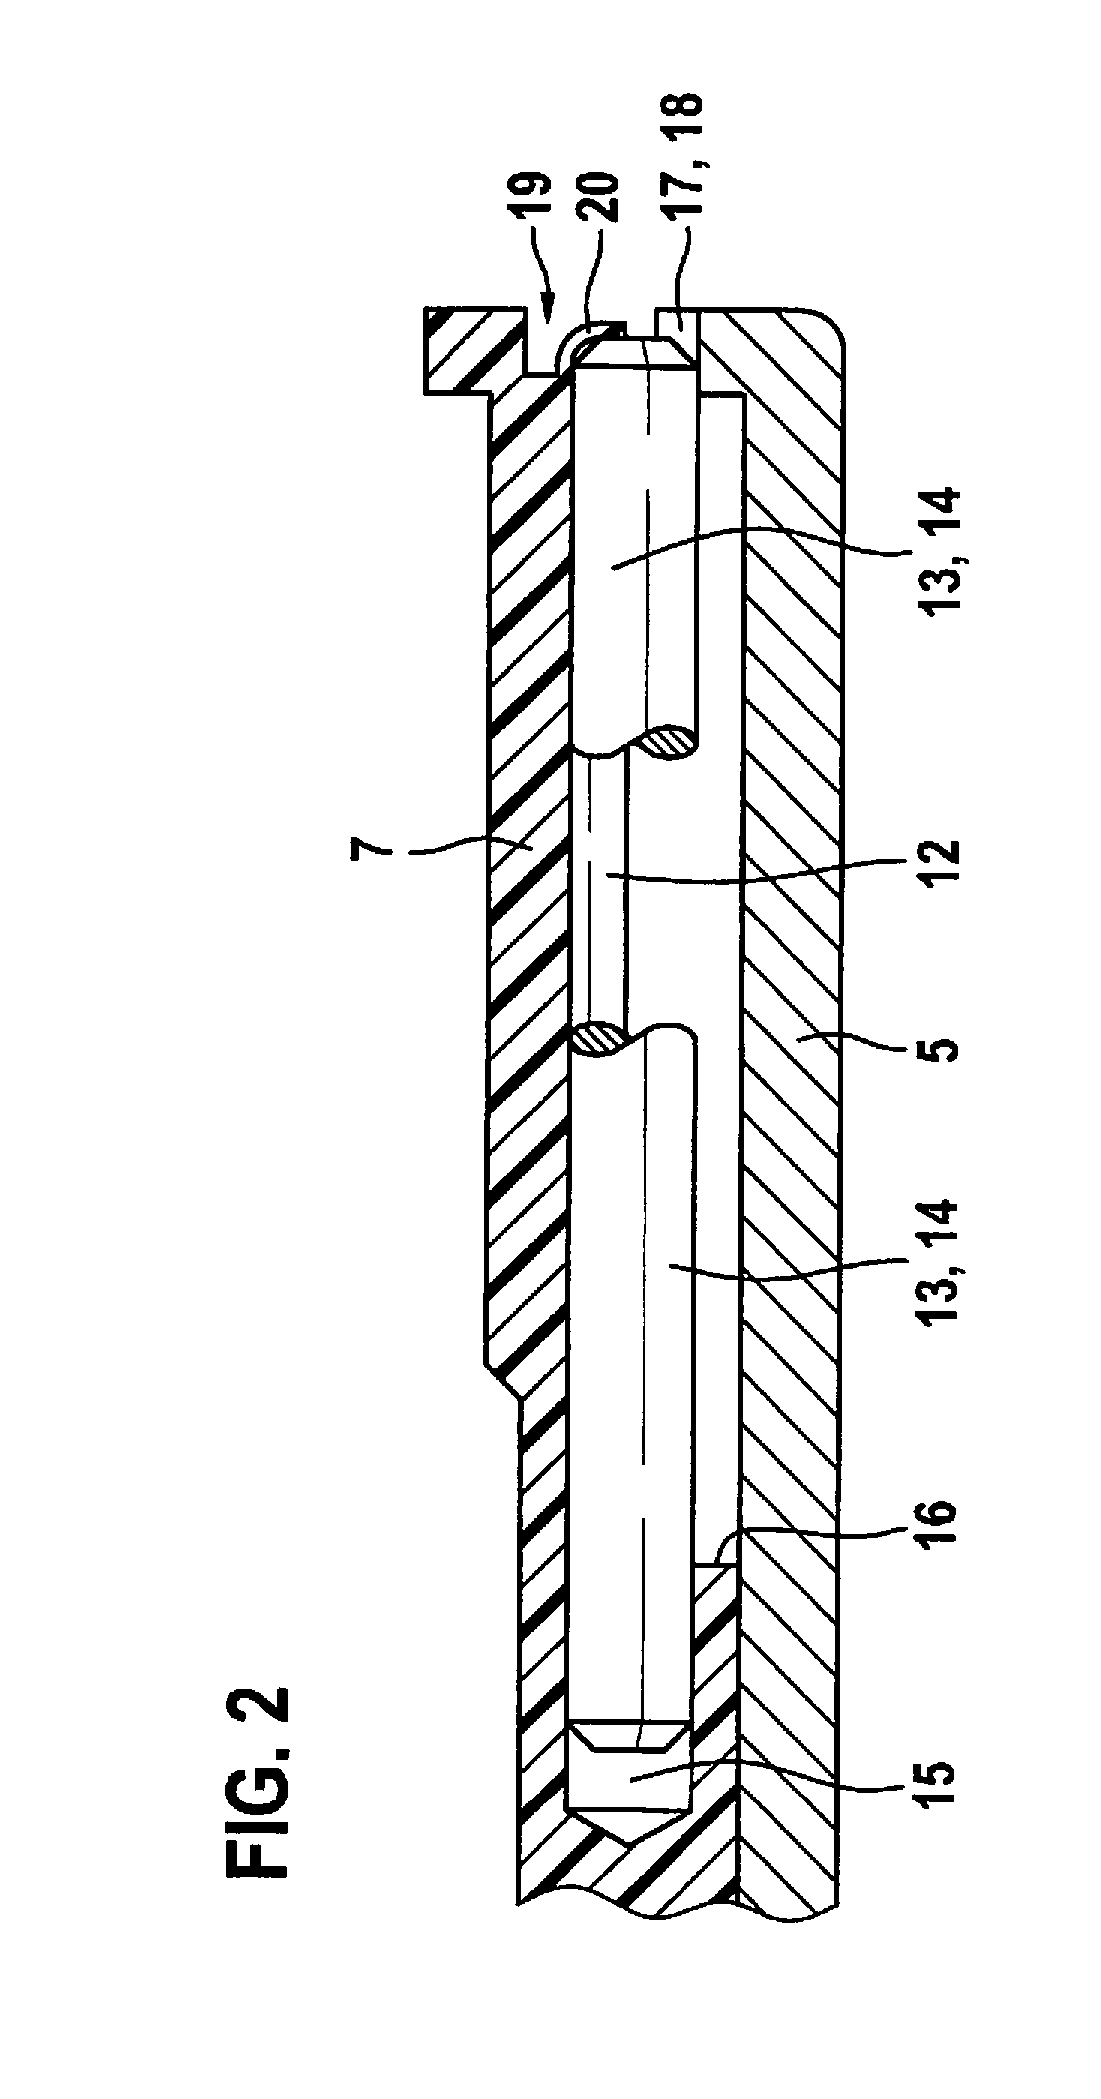 Piston pump assembly for a hydraulic power vehicle braking system